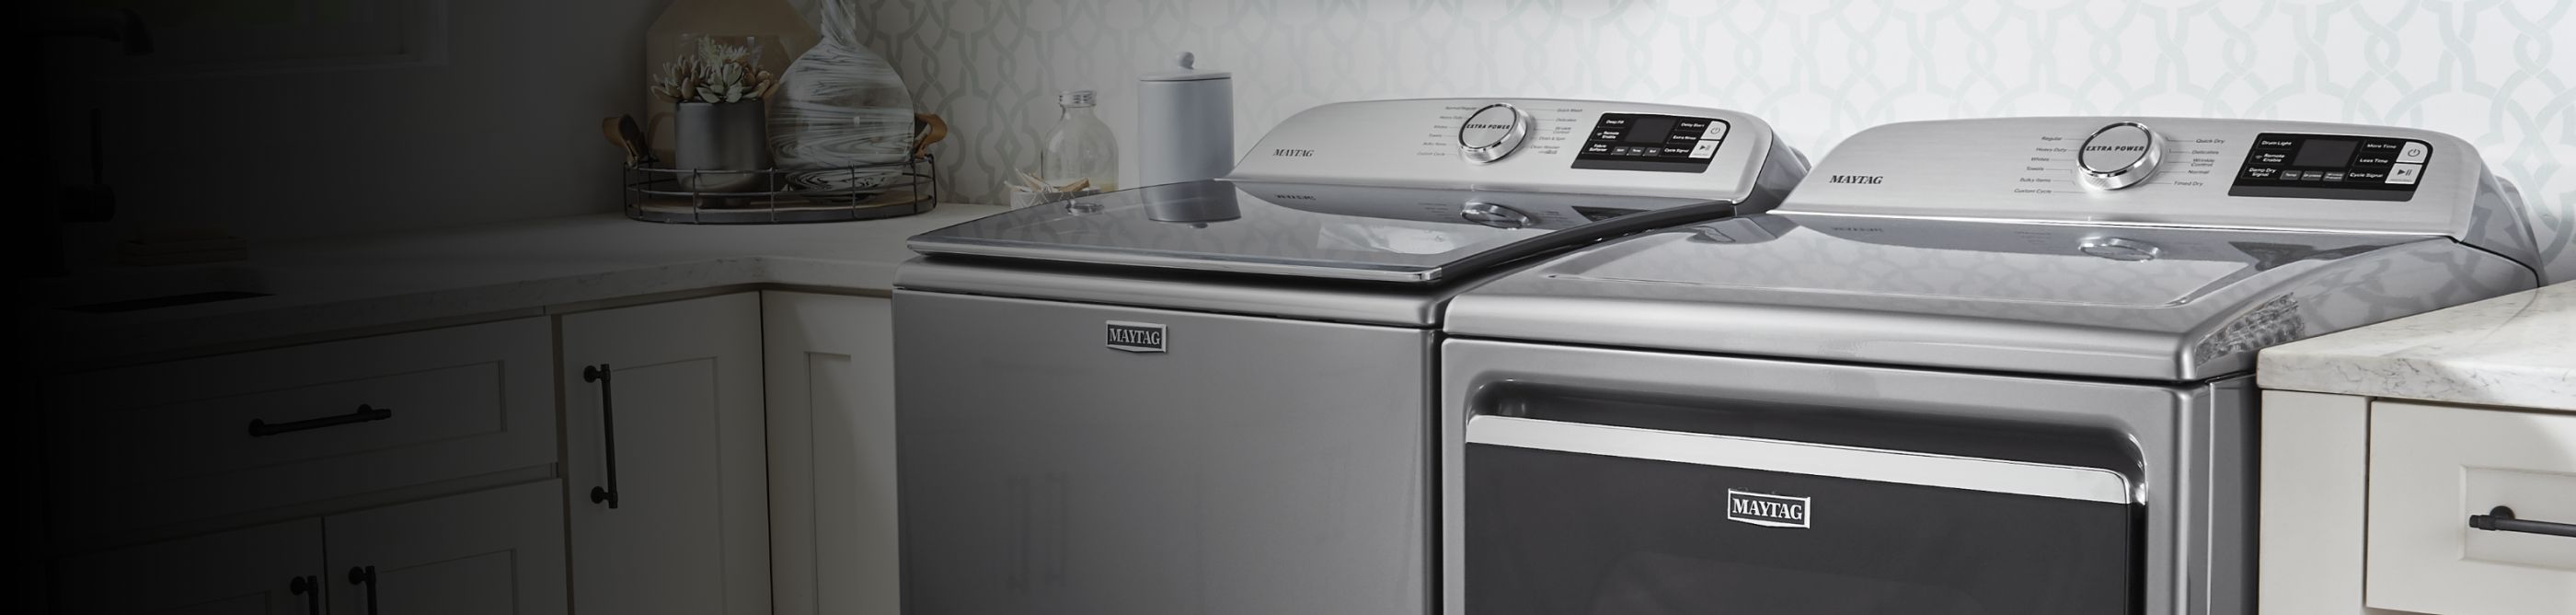 Maytag® top loading washer and dryer